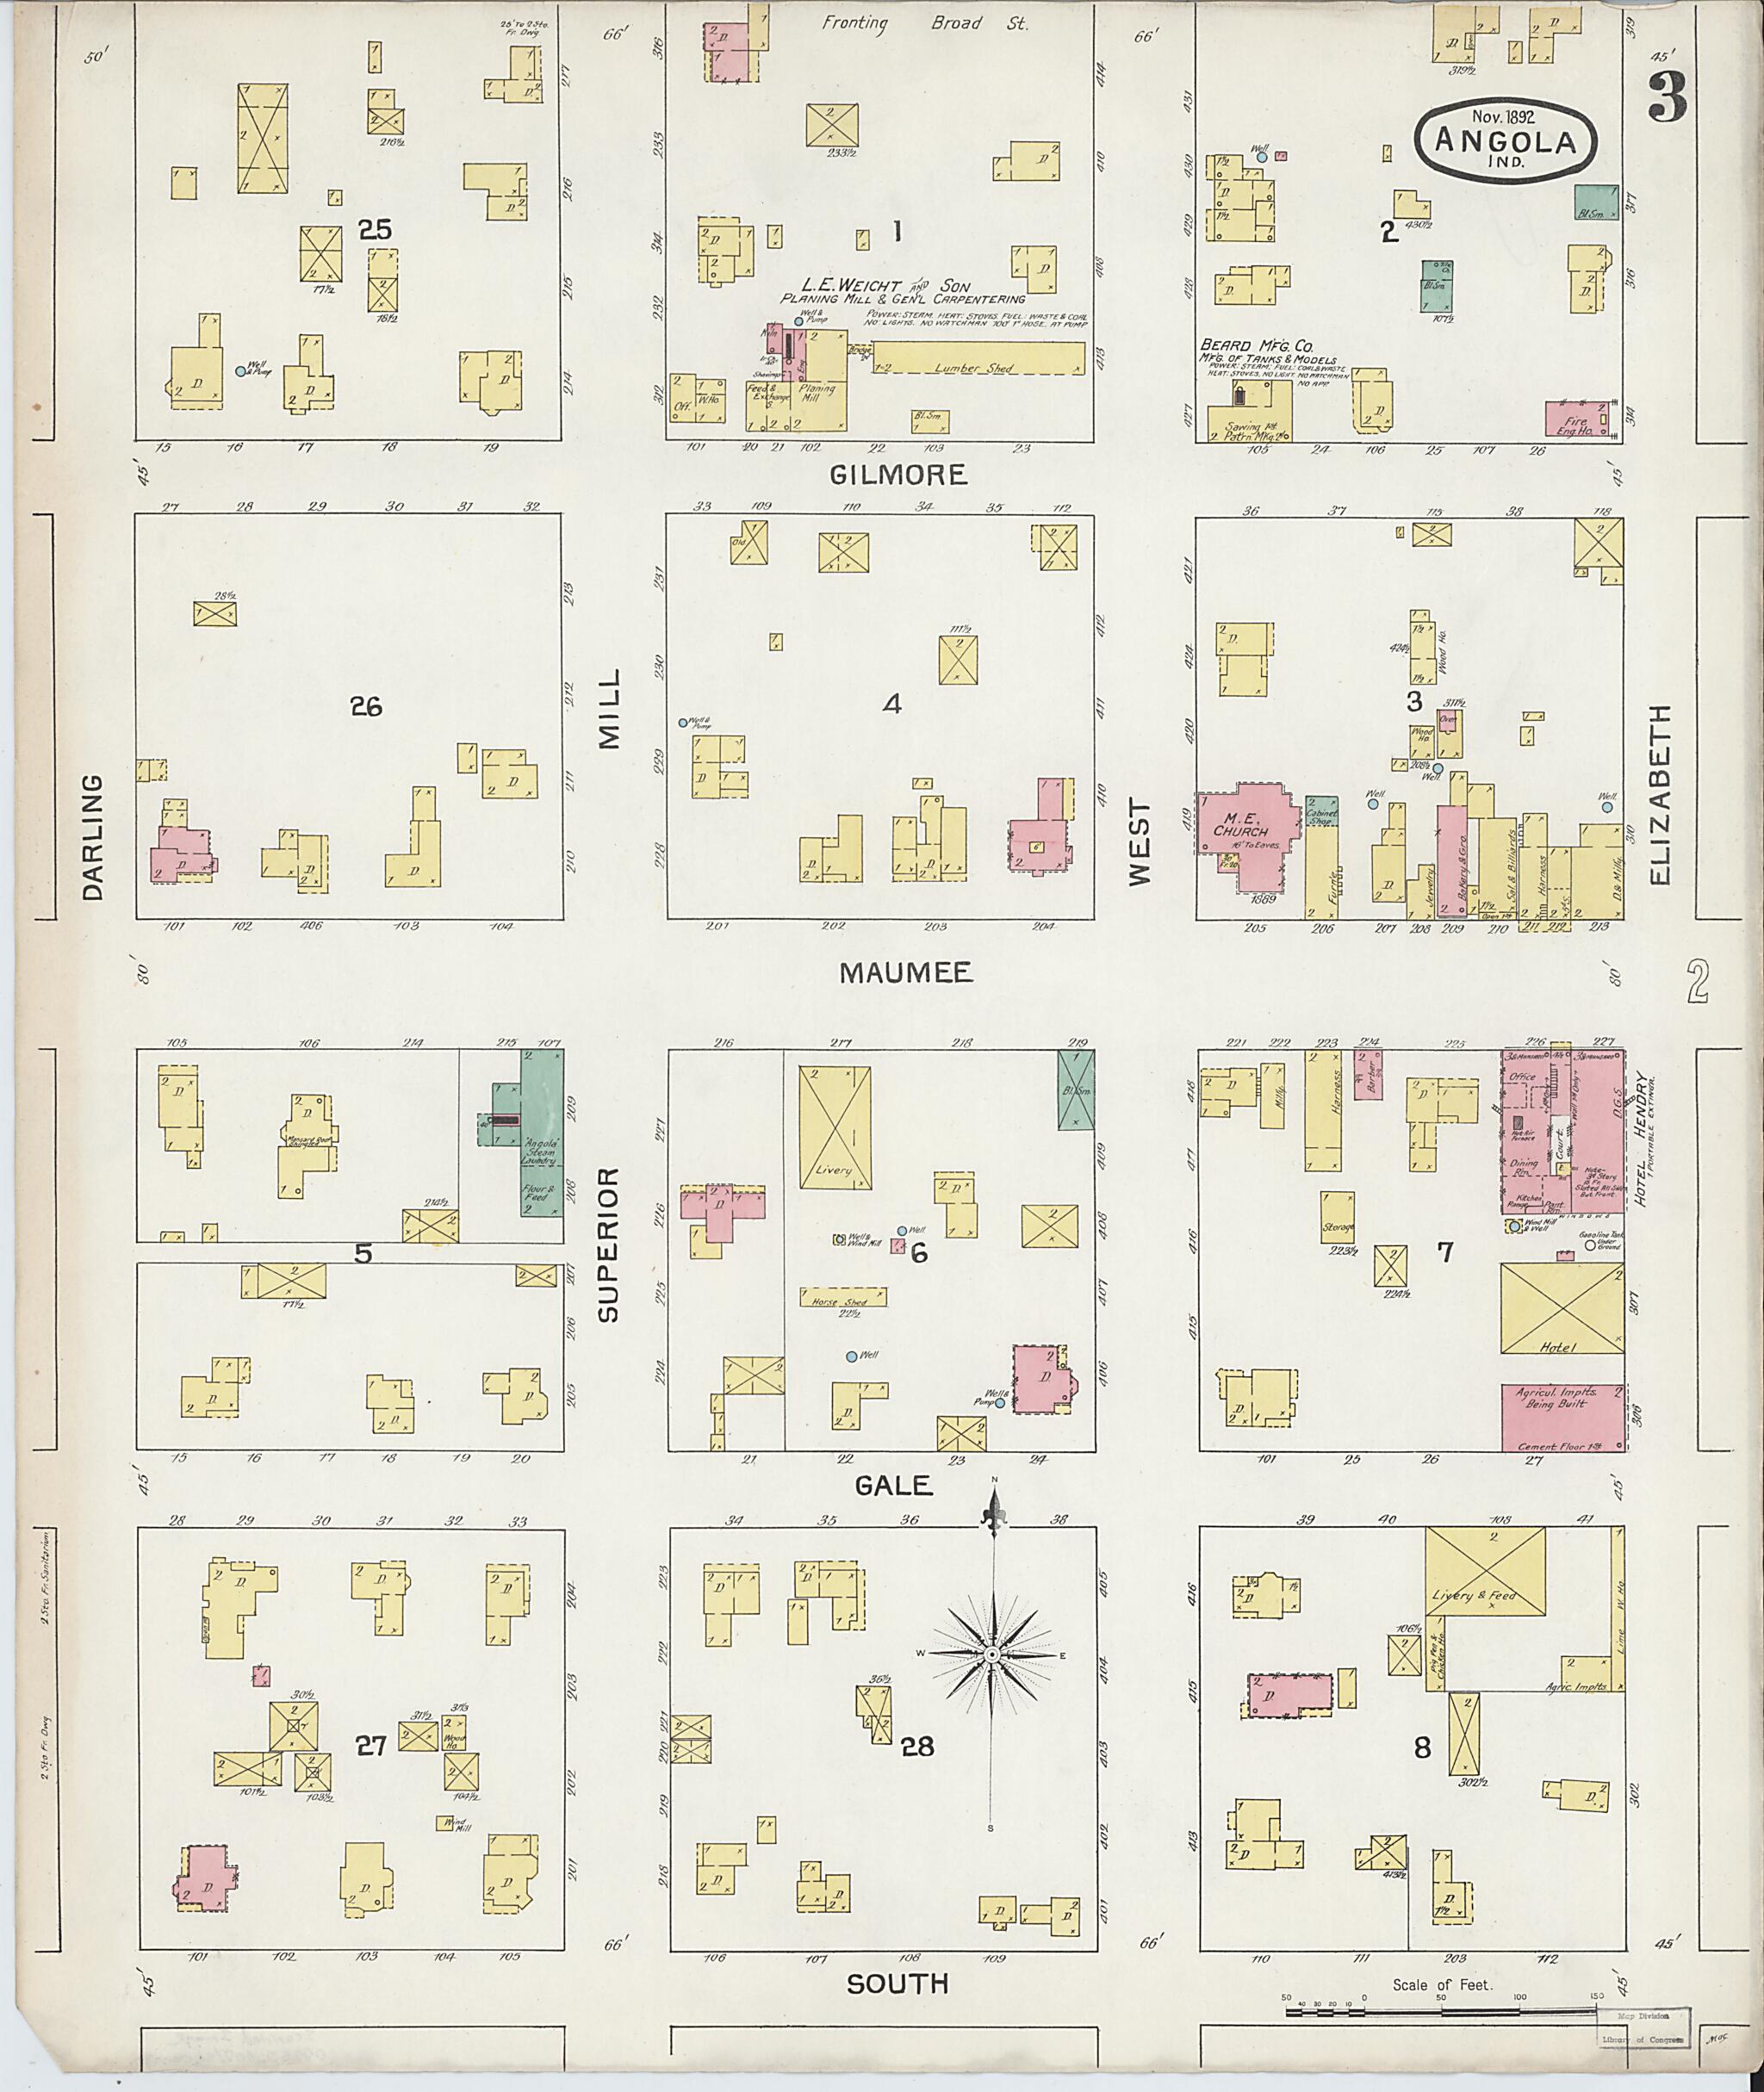 This old map of Angola, Steuben County, Indiana was created by Sanborn Map Company in 1892